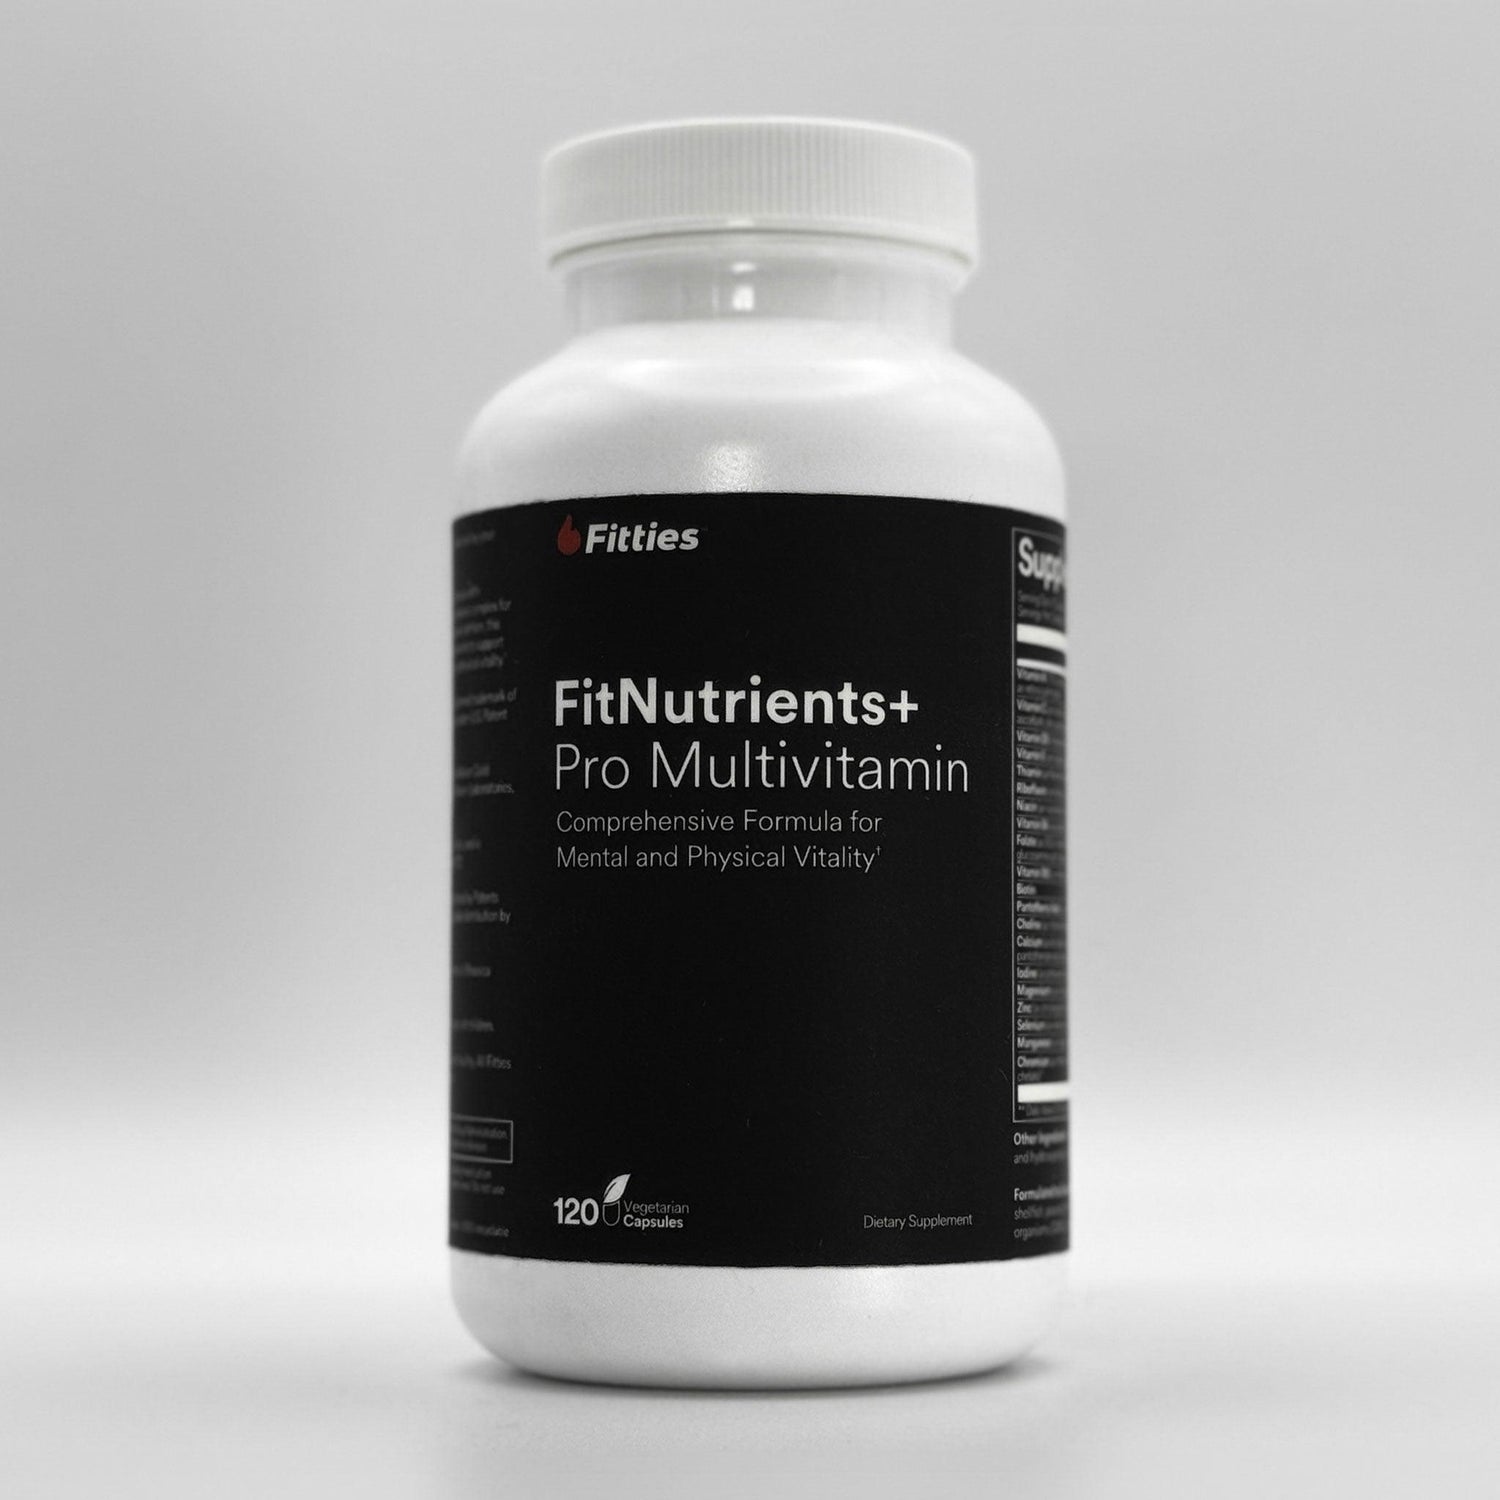 Fitties FitNutrients+ front label